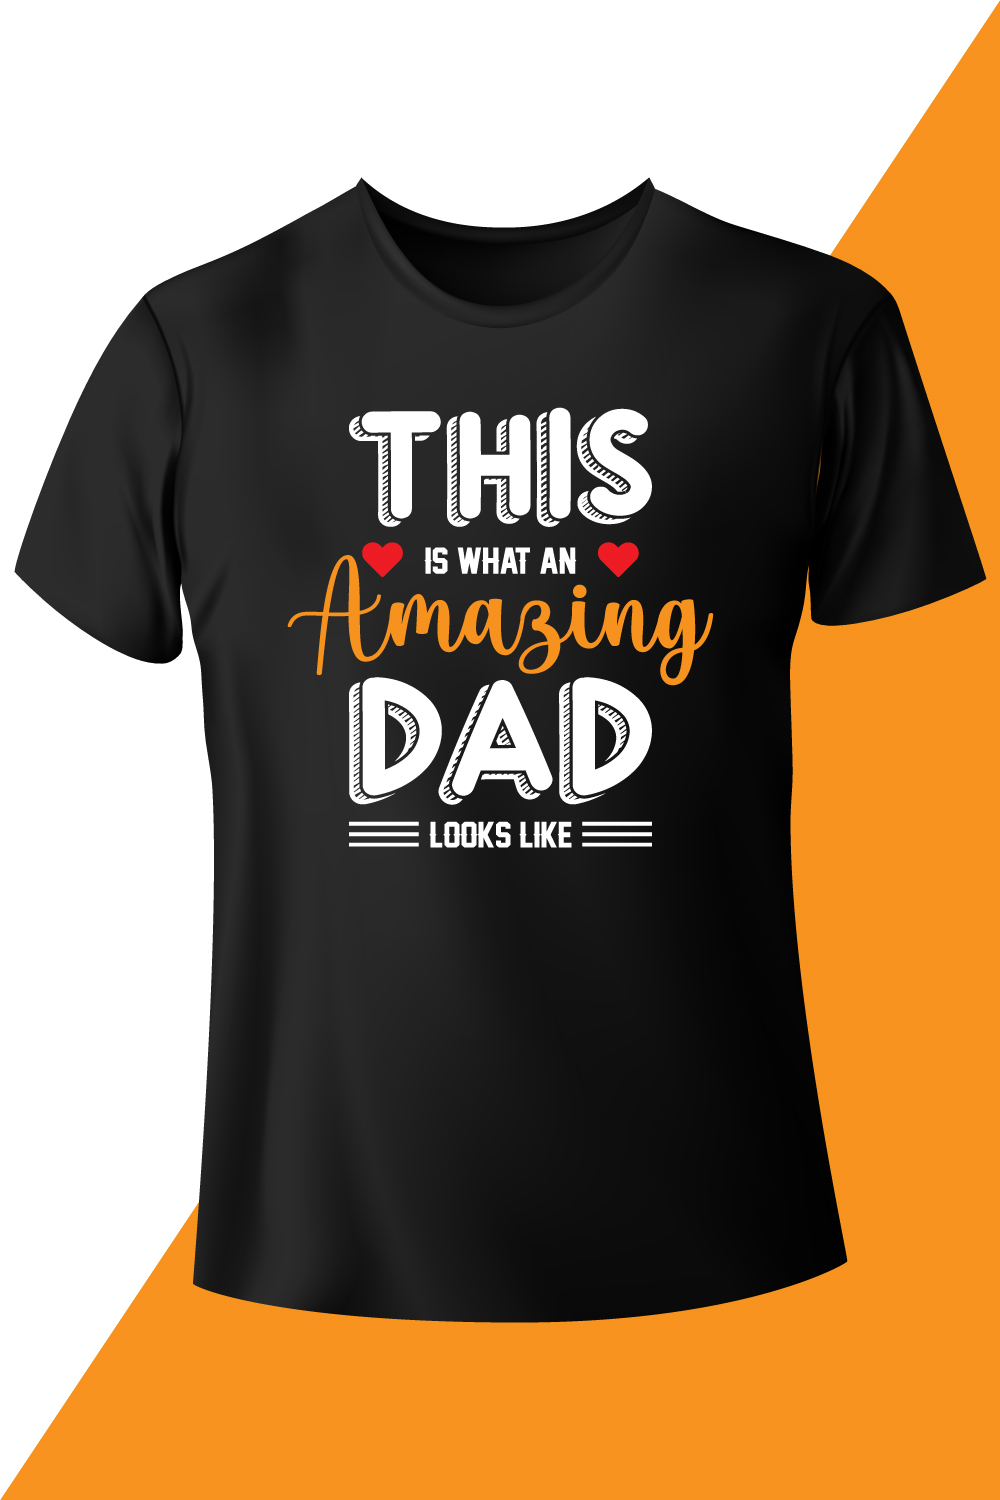 Image of a black t-shirt with an amazing inscription this is what an amazing dad looks like.